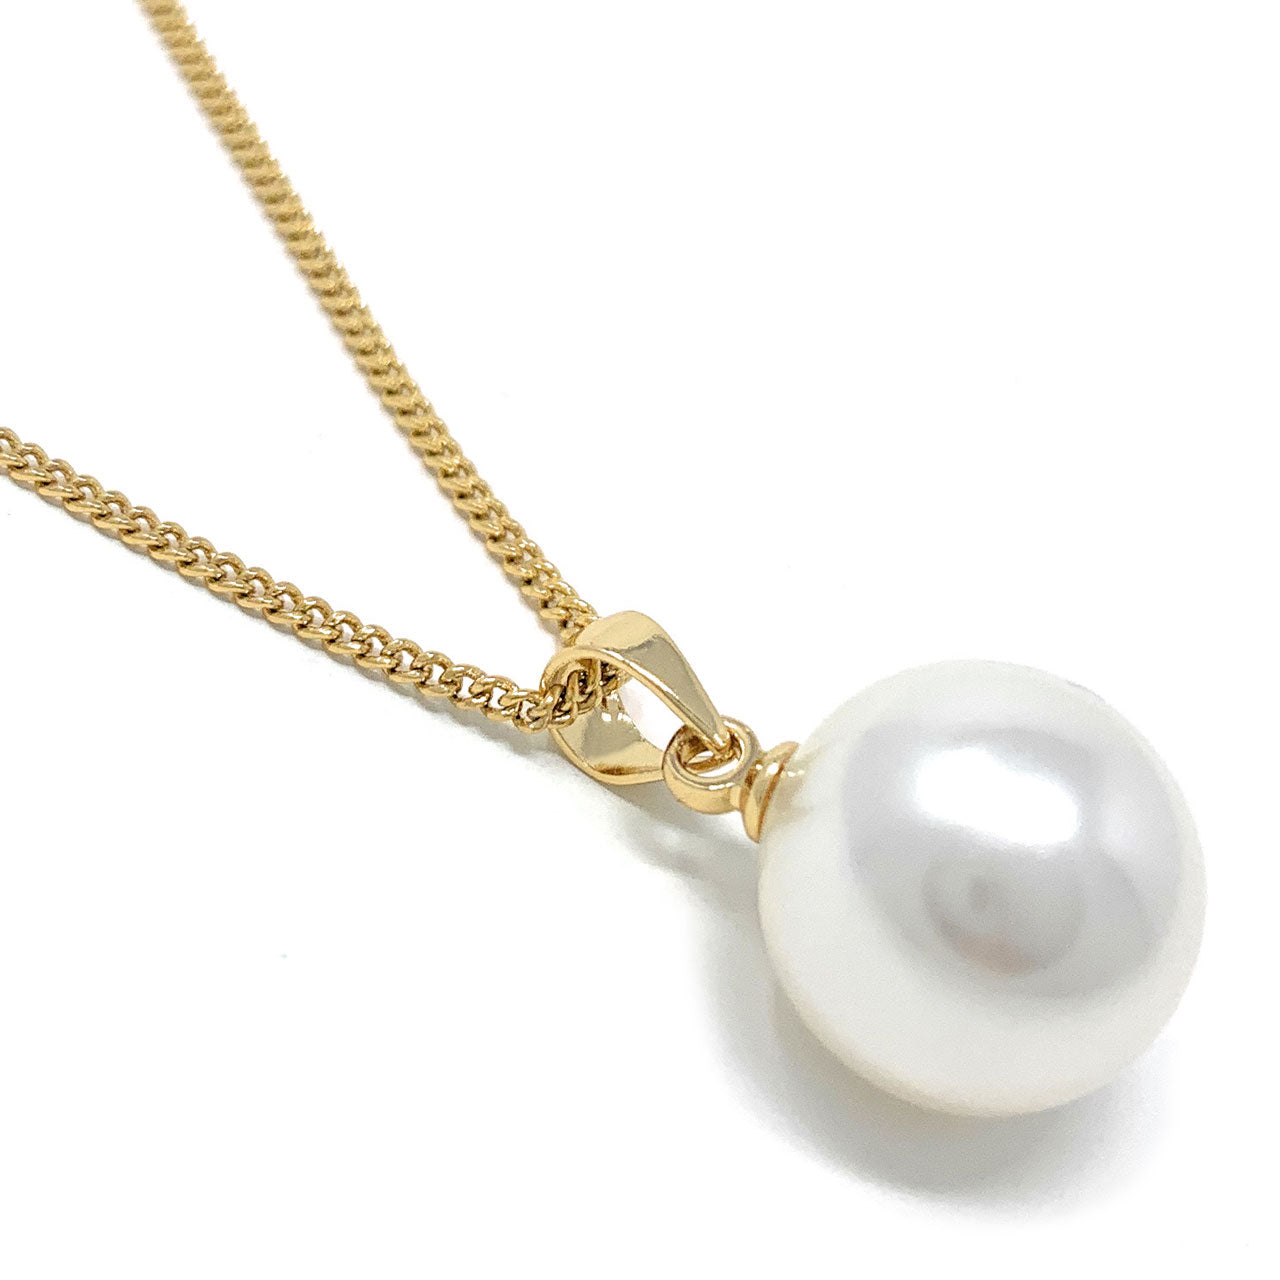 Elizabeth Pendant Necklace with Ivory White Round Pearls from Swarovski Gold Plated - Ed Heart